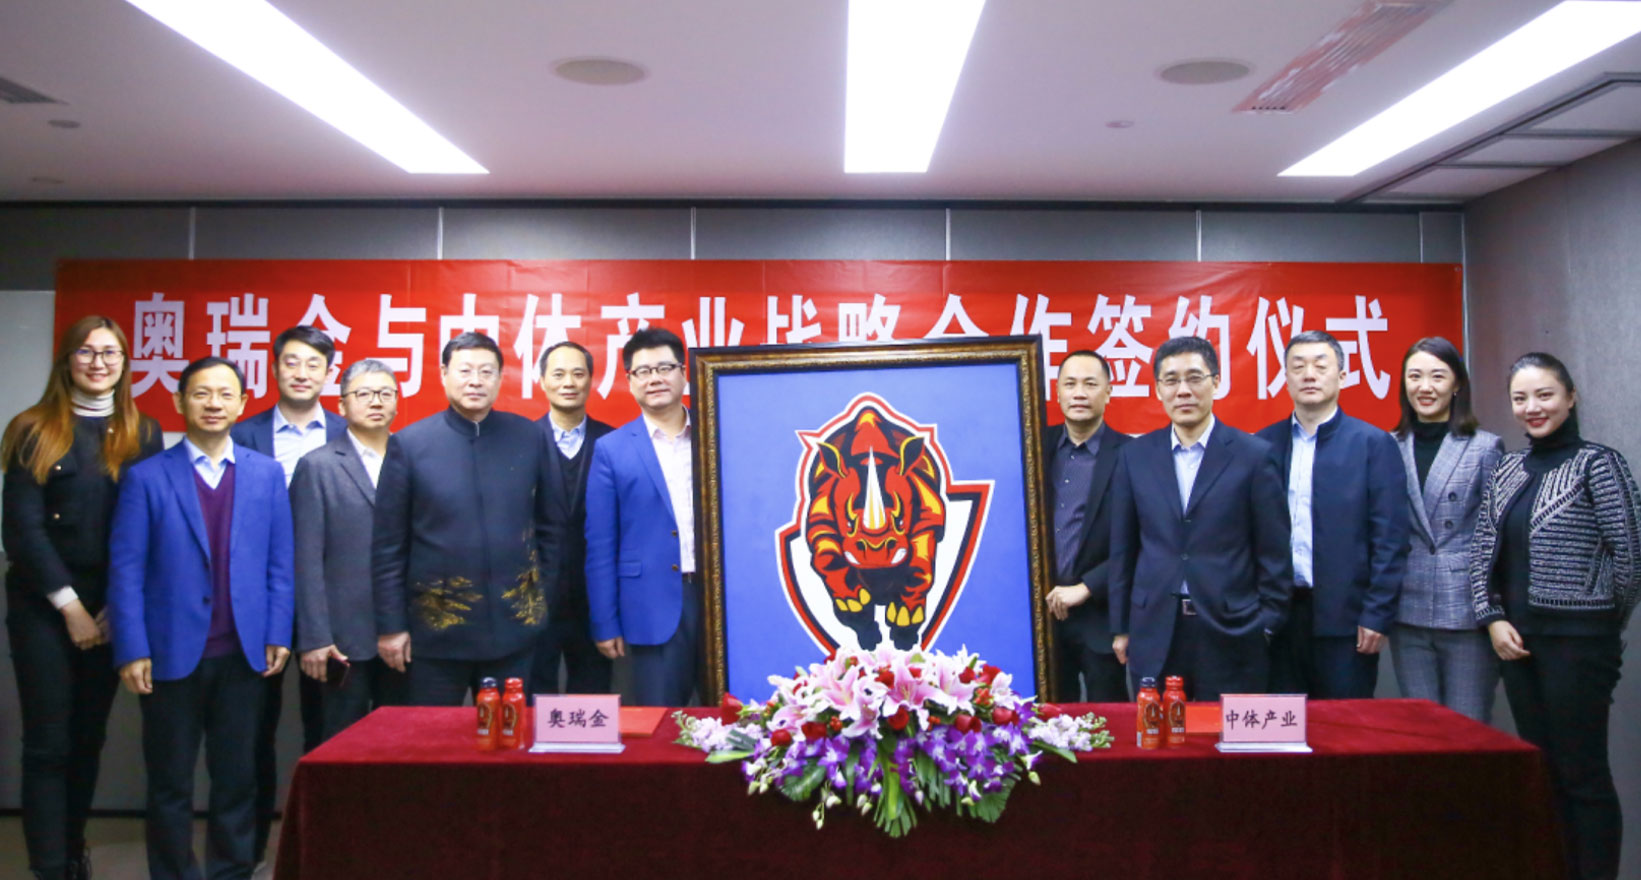 New Year’s product for the Winter Olympics   Cross-border cooperation between O.R.G Technology and China Sports Industry Group, the future is promising